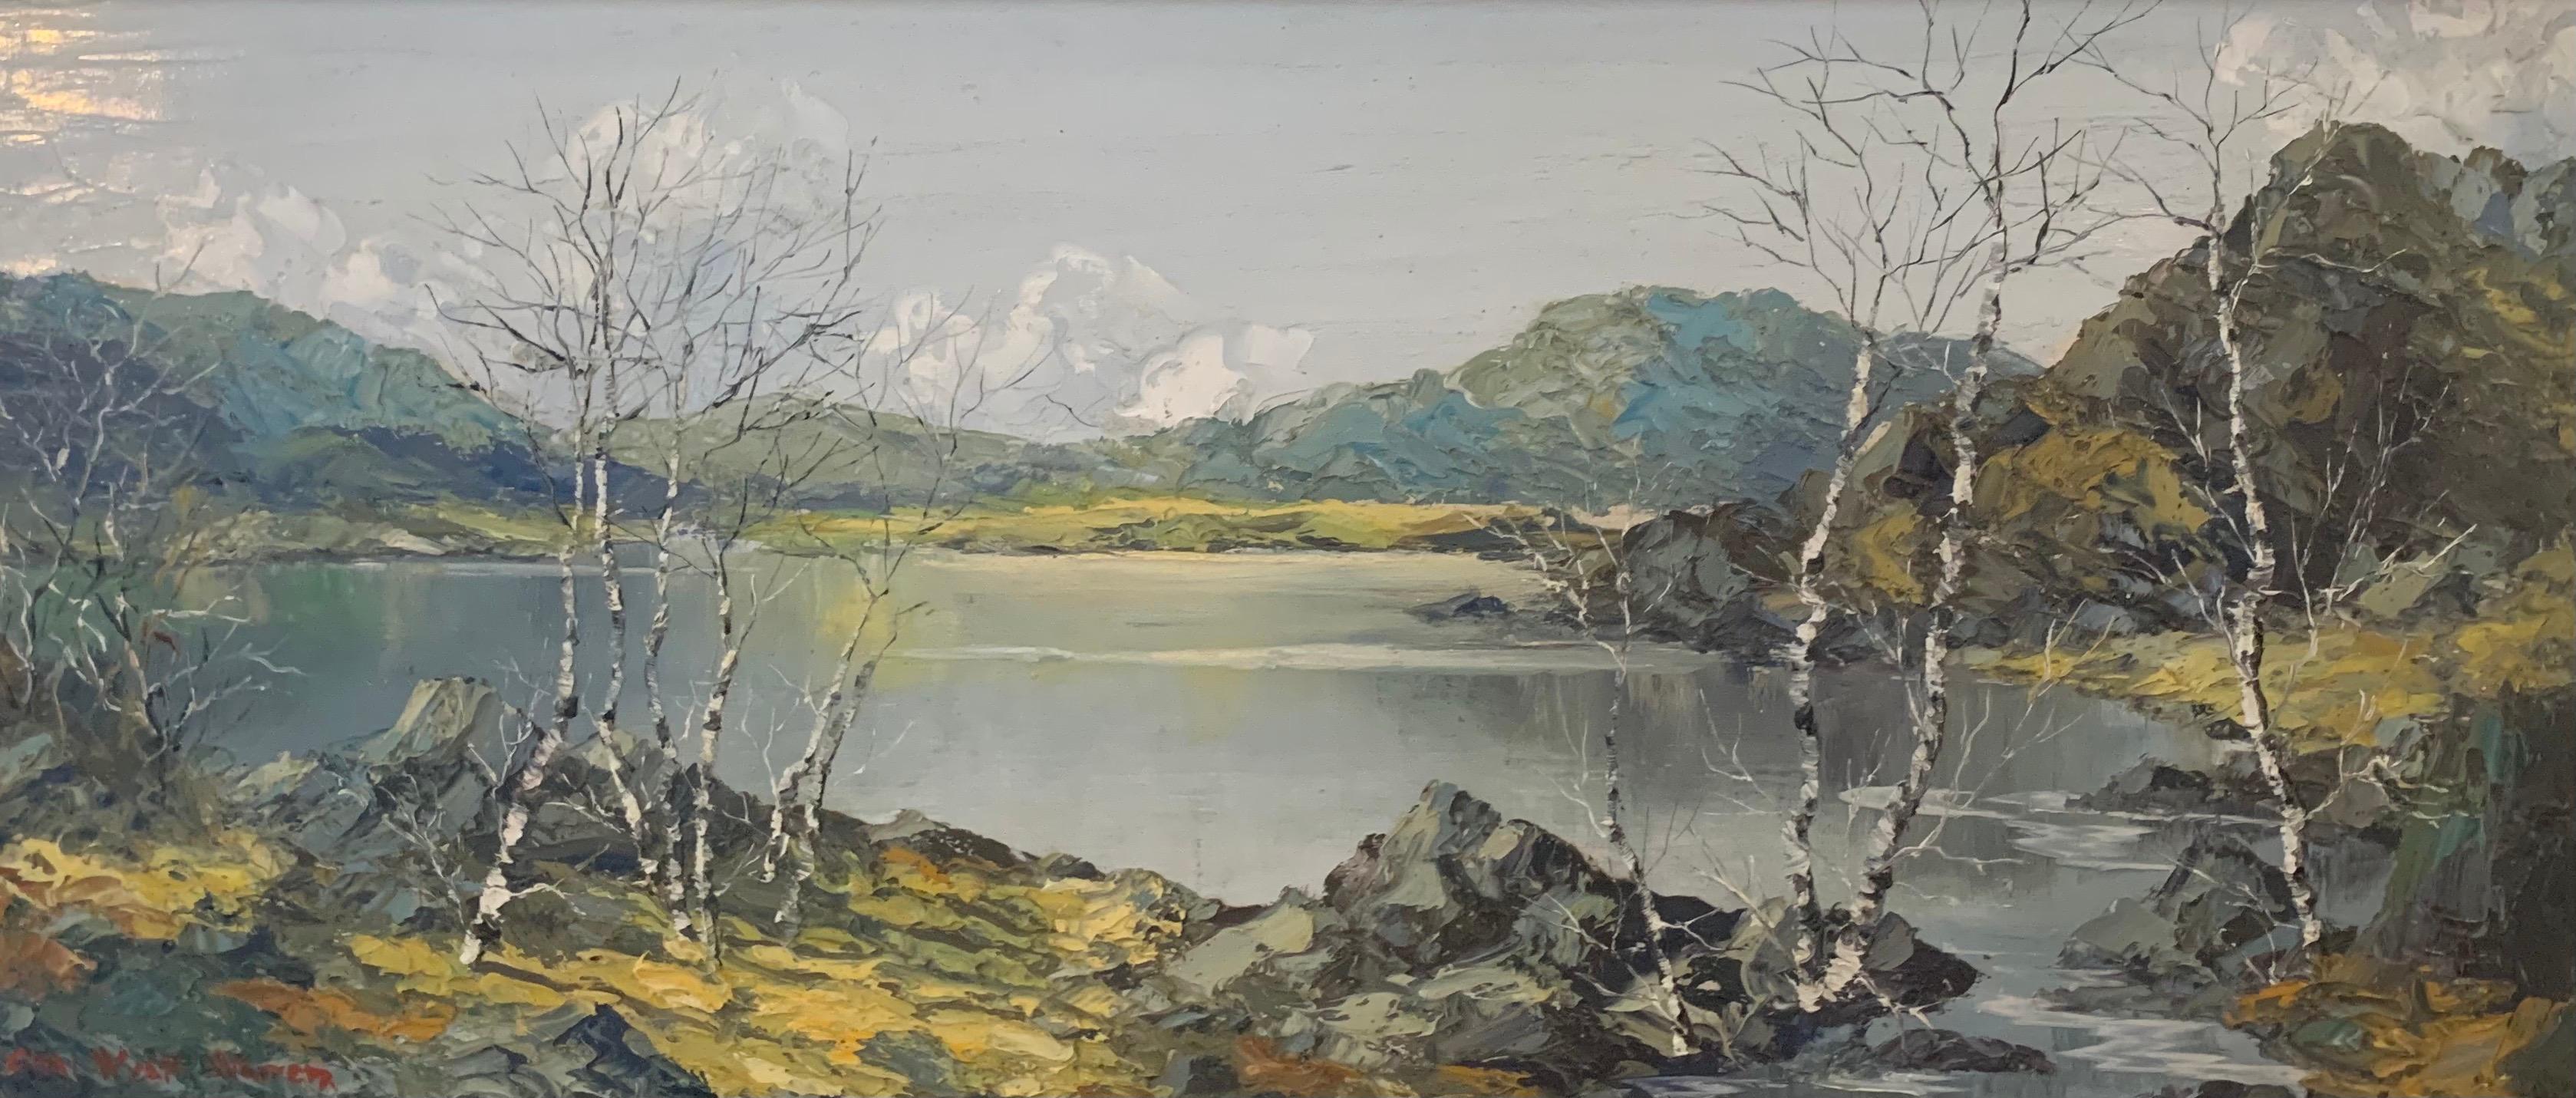 Oil Painting of Snowdon Mountains & Lakes in Wales by Modern British Artist - Gray Landscape Painting by Charles Wyatt Warren